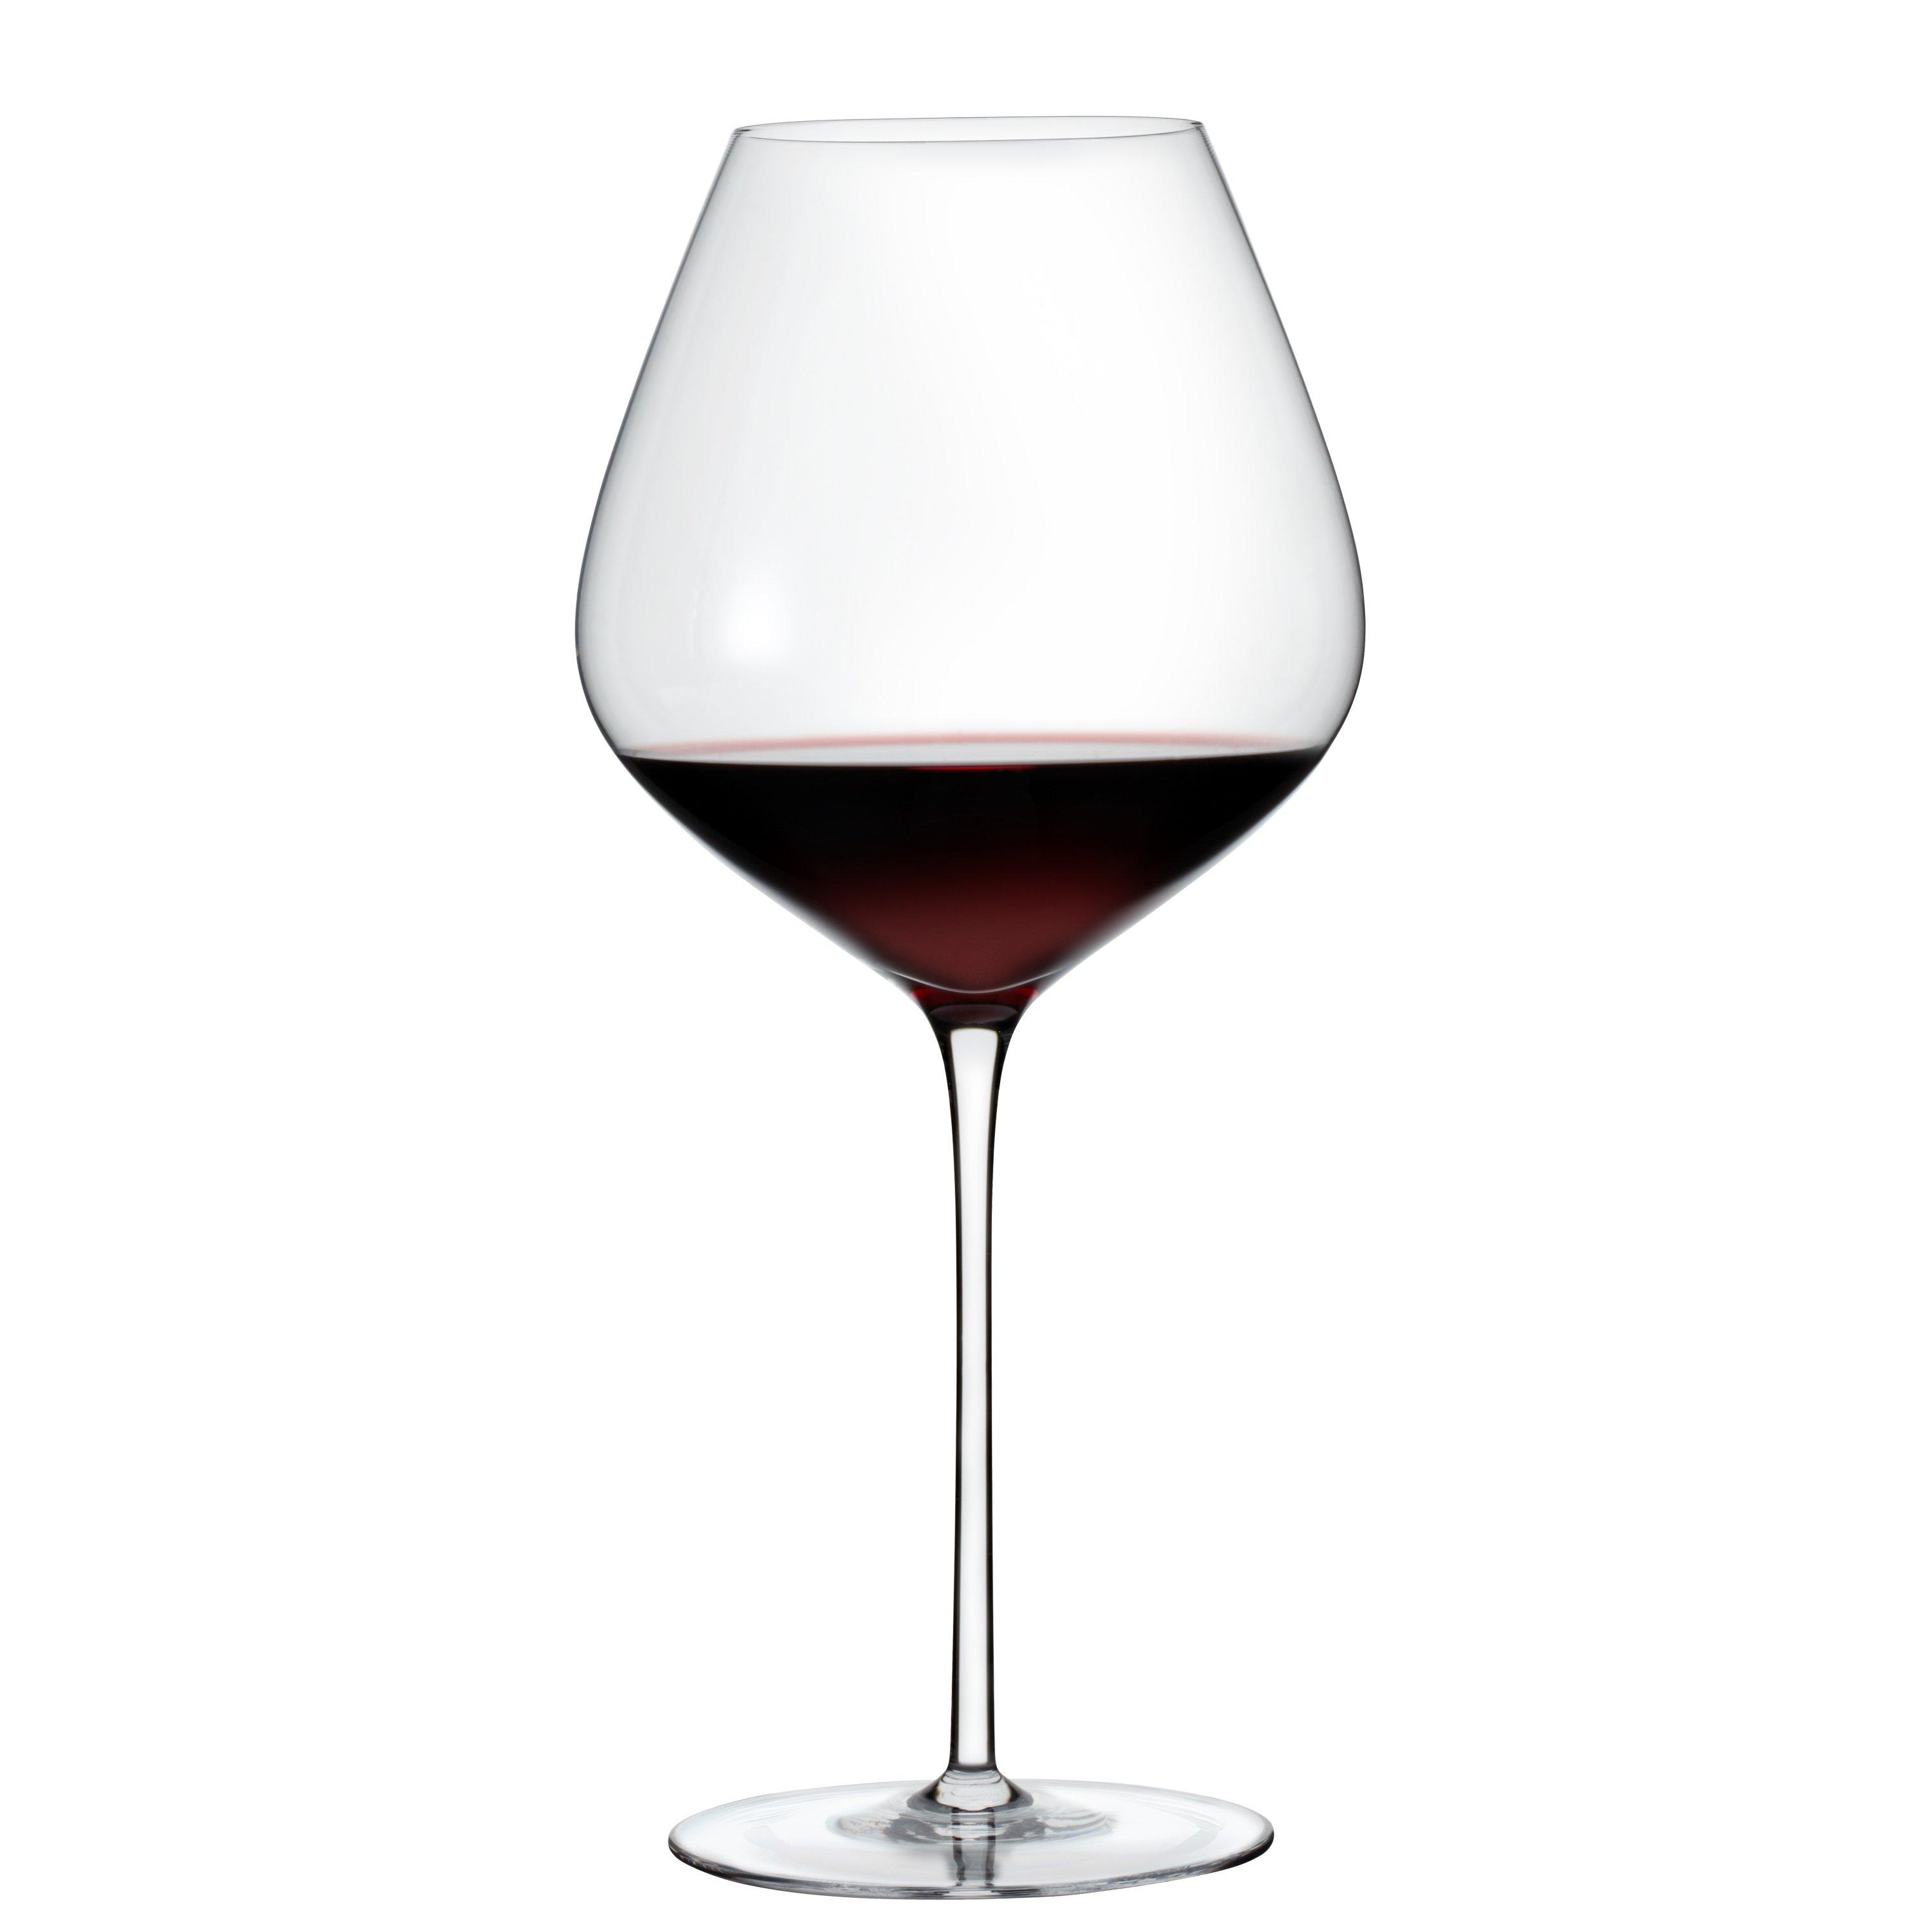 thin stem wine glasses, thin stem wine glasses Suppliers and Manufacturers  at